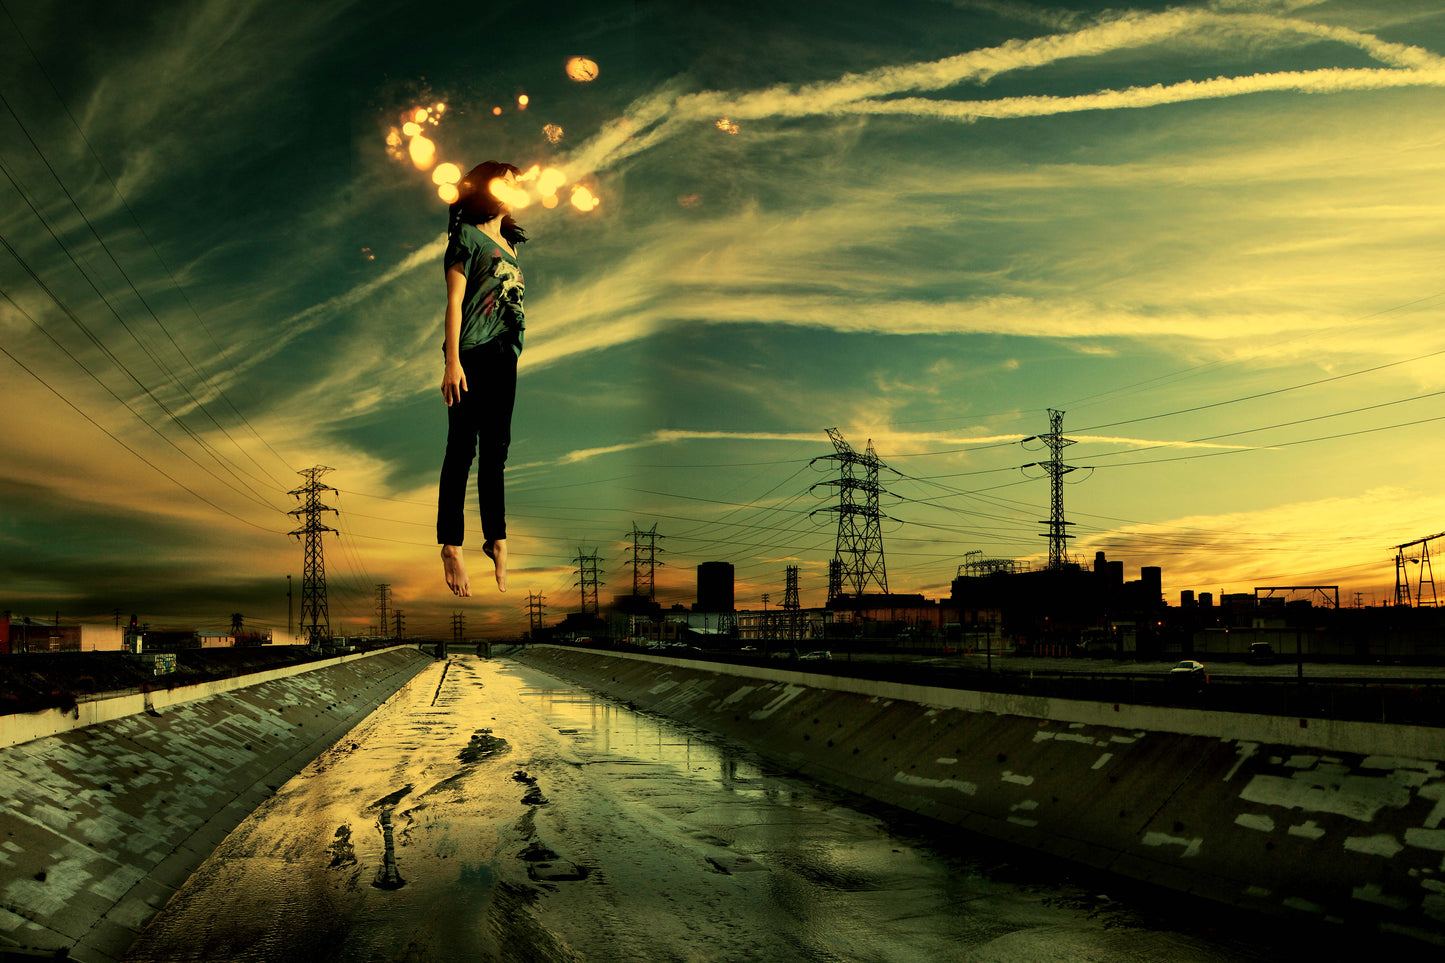 This mesmerizing digital collage presents a woman suspended in mid-air above the LA river skyline at sunset. Bathed in tones of green and yellow, the composition is further enhanced by streaks of clouds in the sky and sparks of light that add an ethereal touch to the scene.